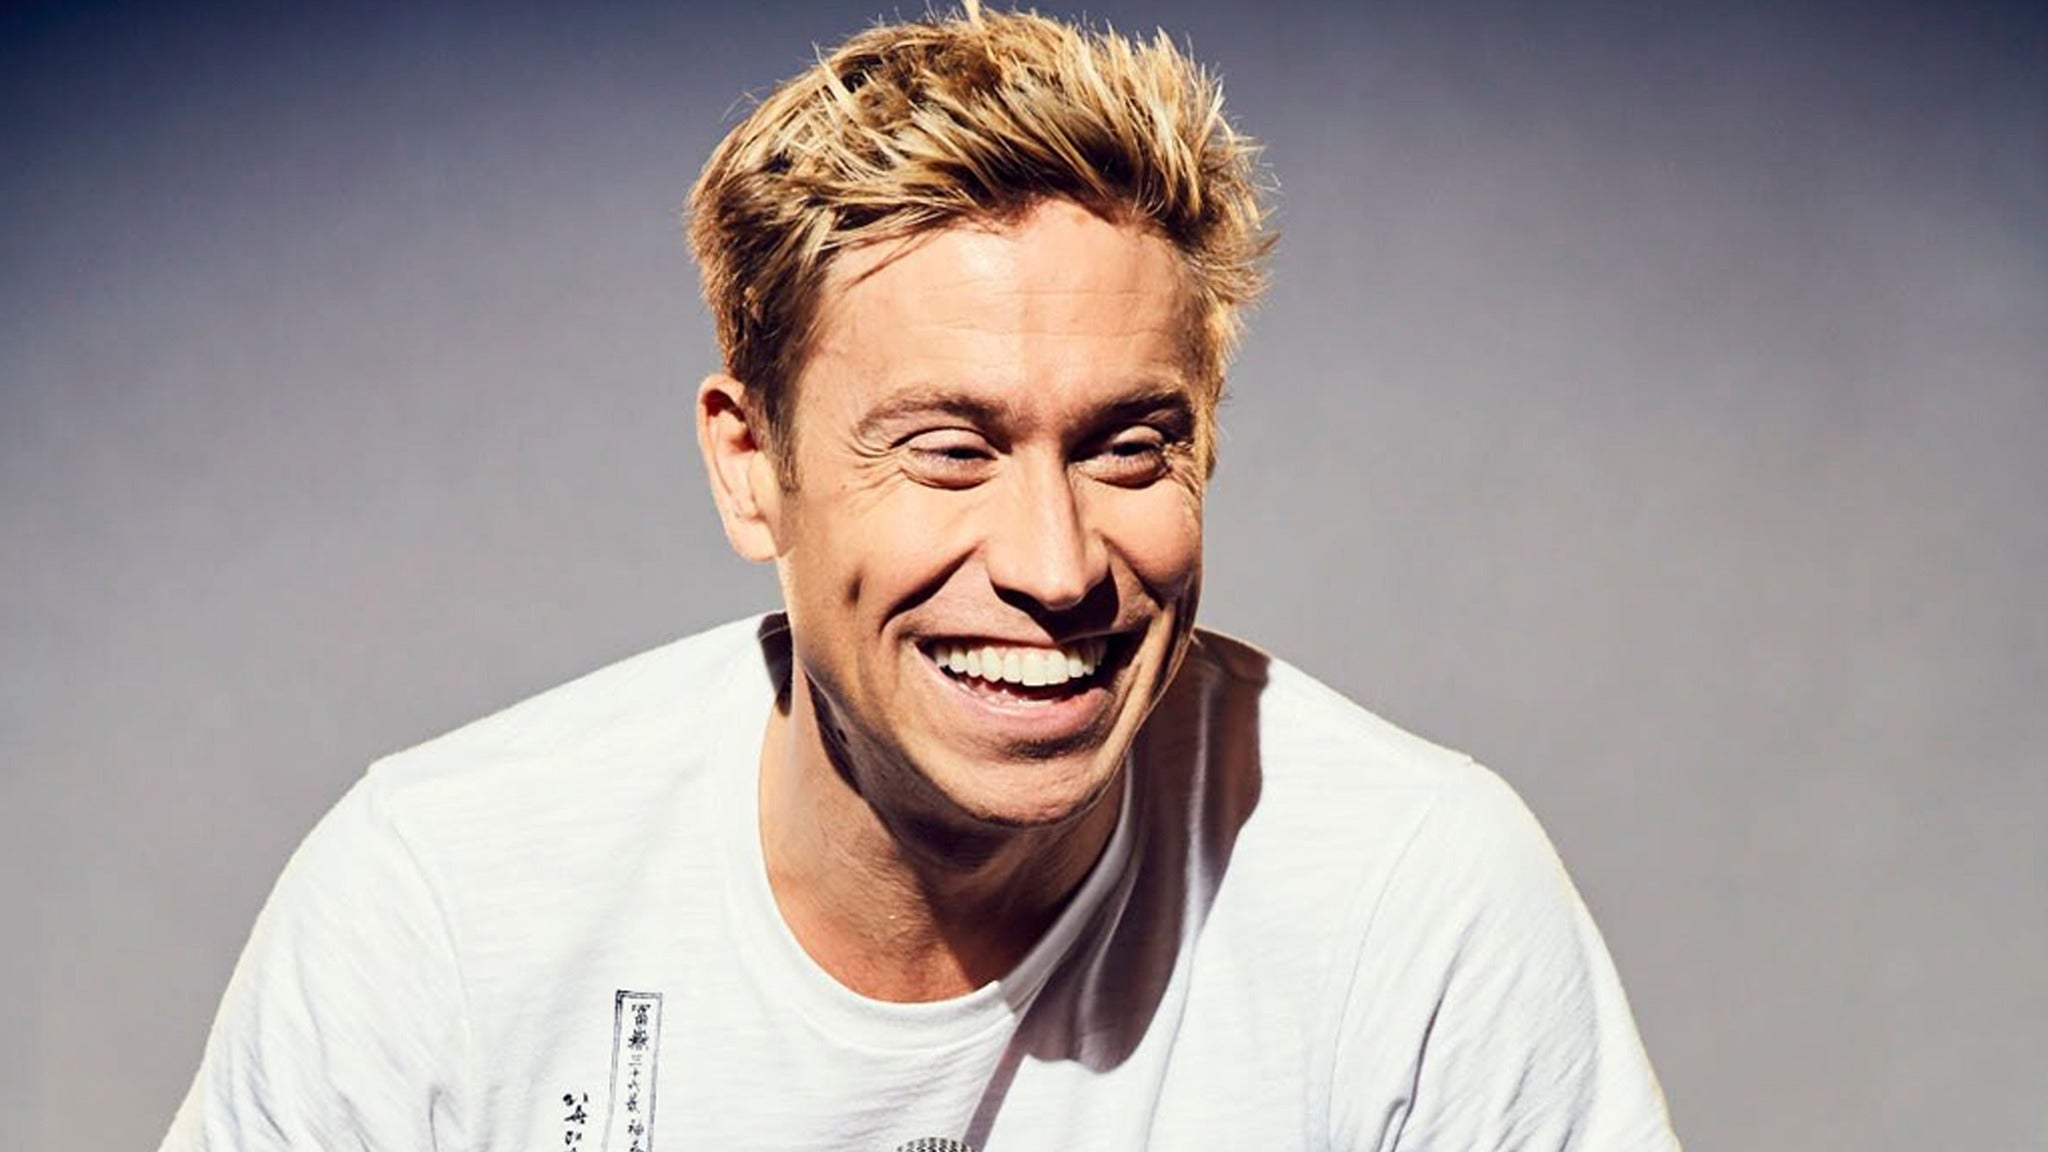 Russell Howard in Minneapolis promo photo for Live Nation presale offer code